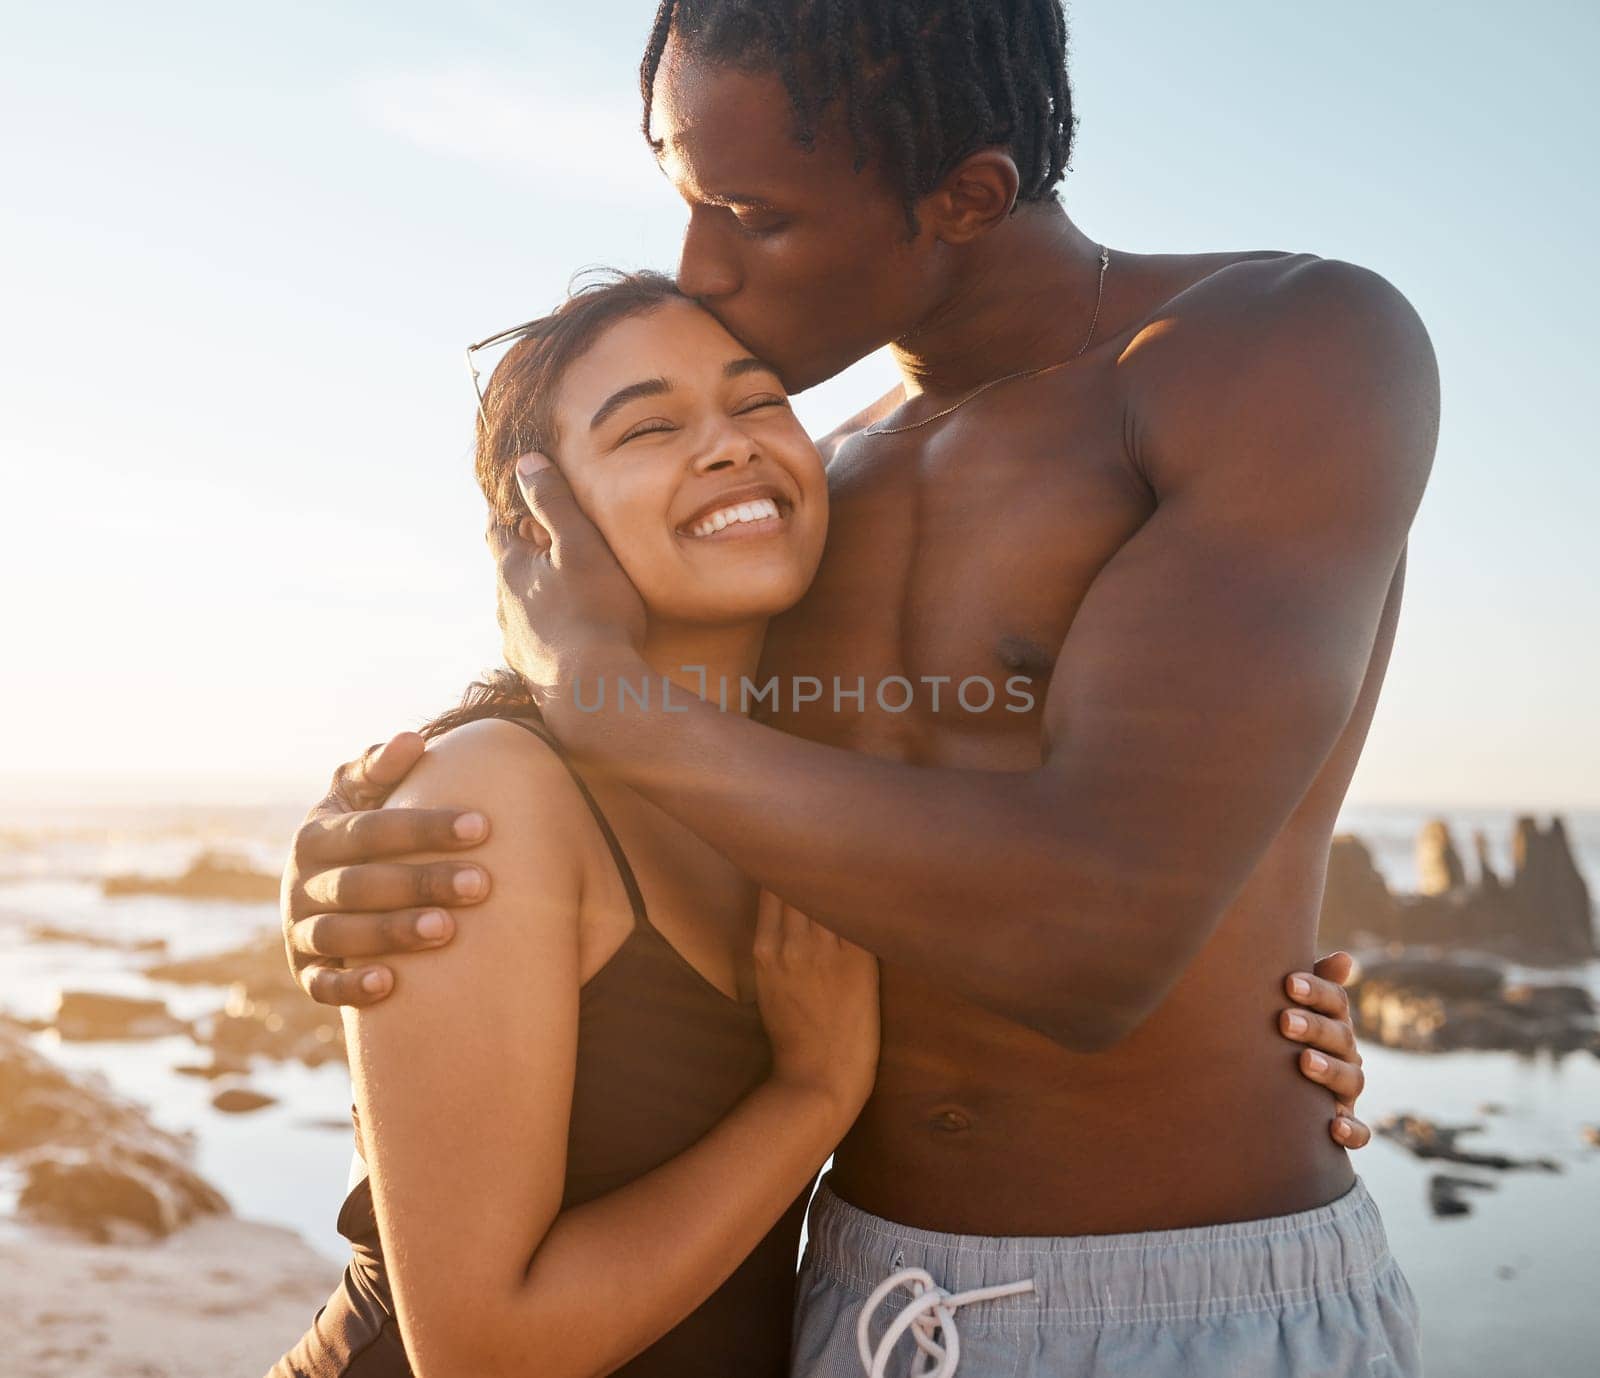 Couple hug or forehead kiss on sunset beach in relax romance holiday, love vacation date or bonding summer. Smile, black woman or kissing man in swimwear embrace, trust or travel support by ocean sea.